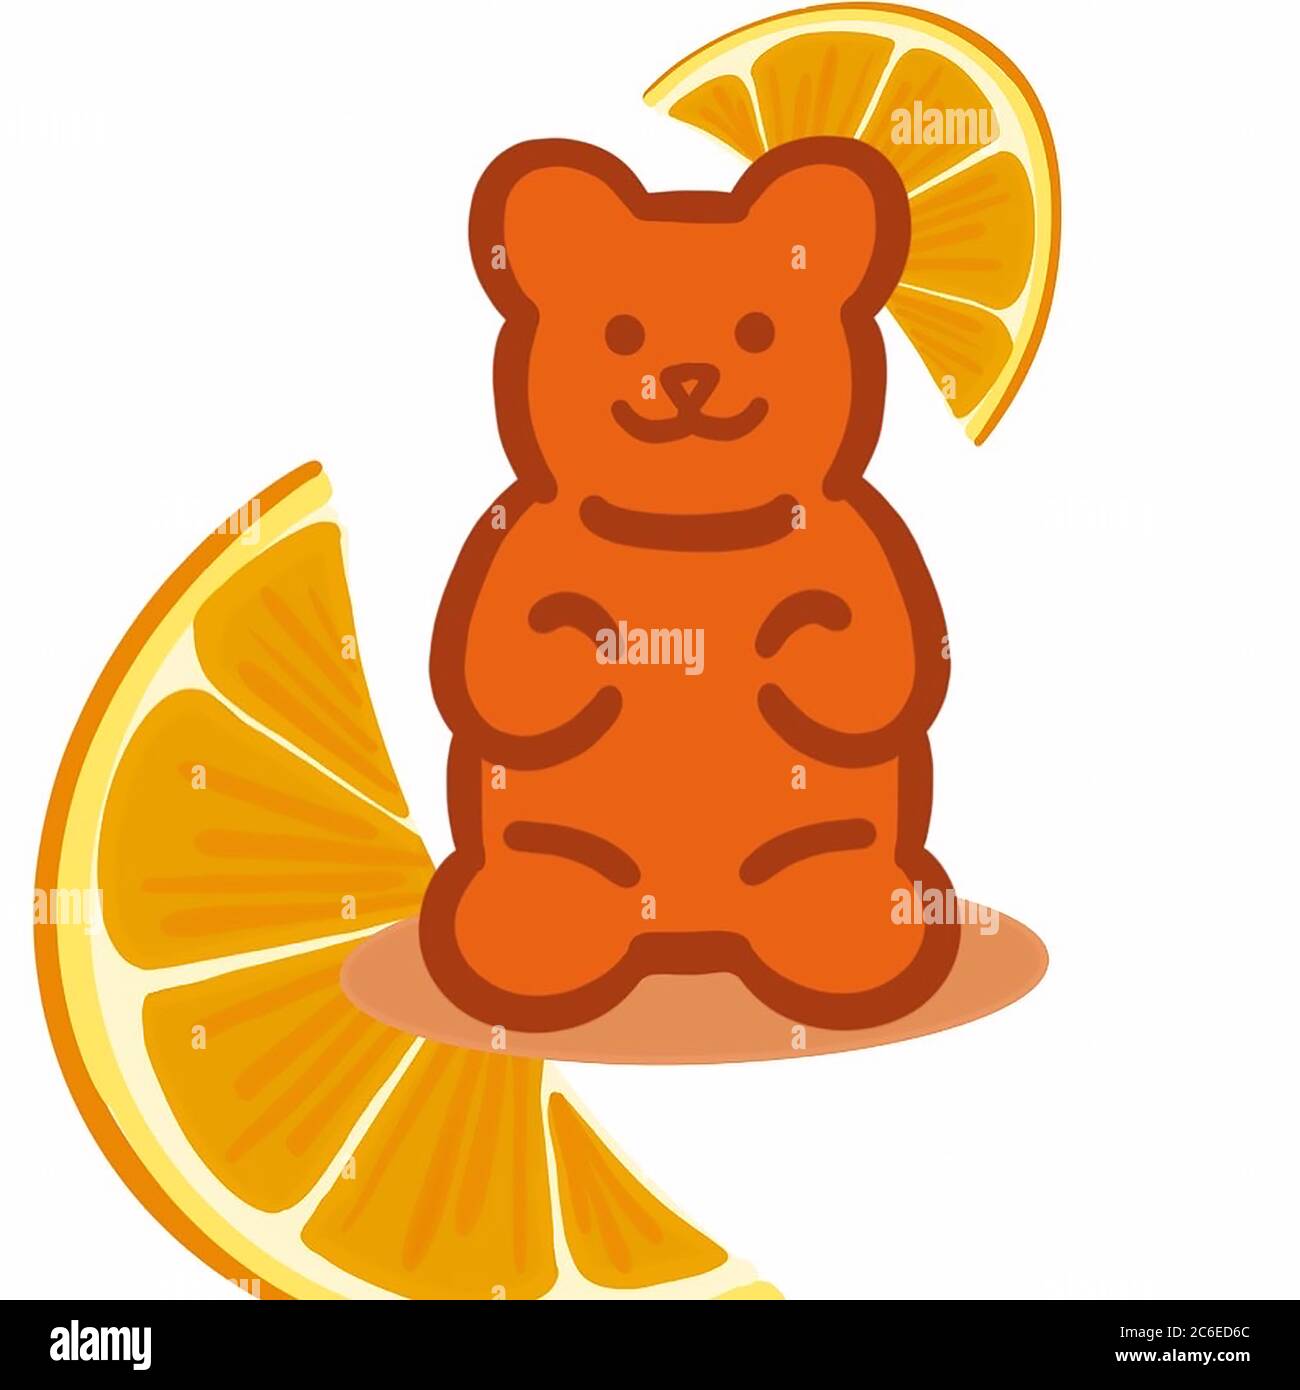 gummy bear cute illustrations with fruits Stock Photo